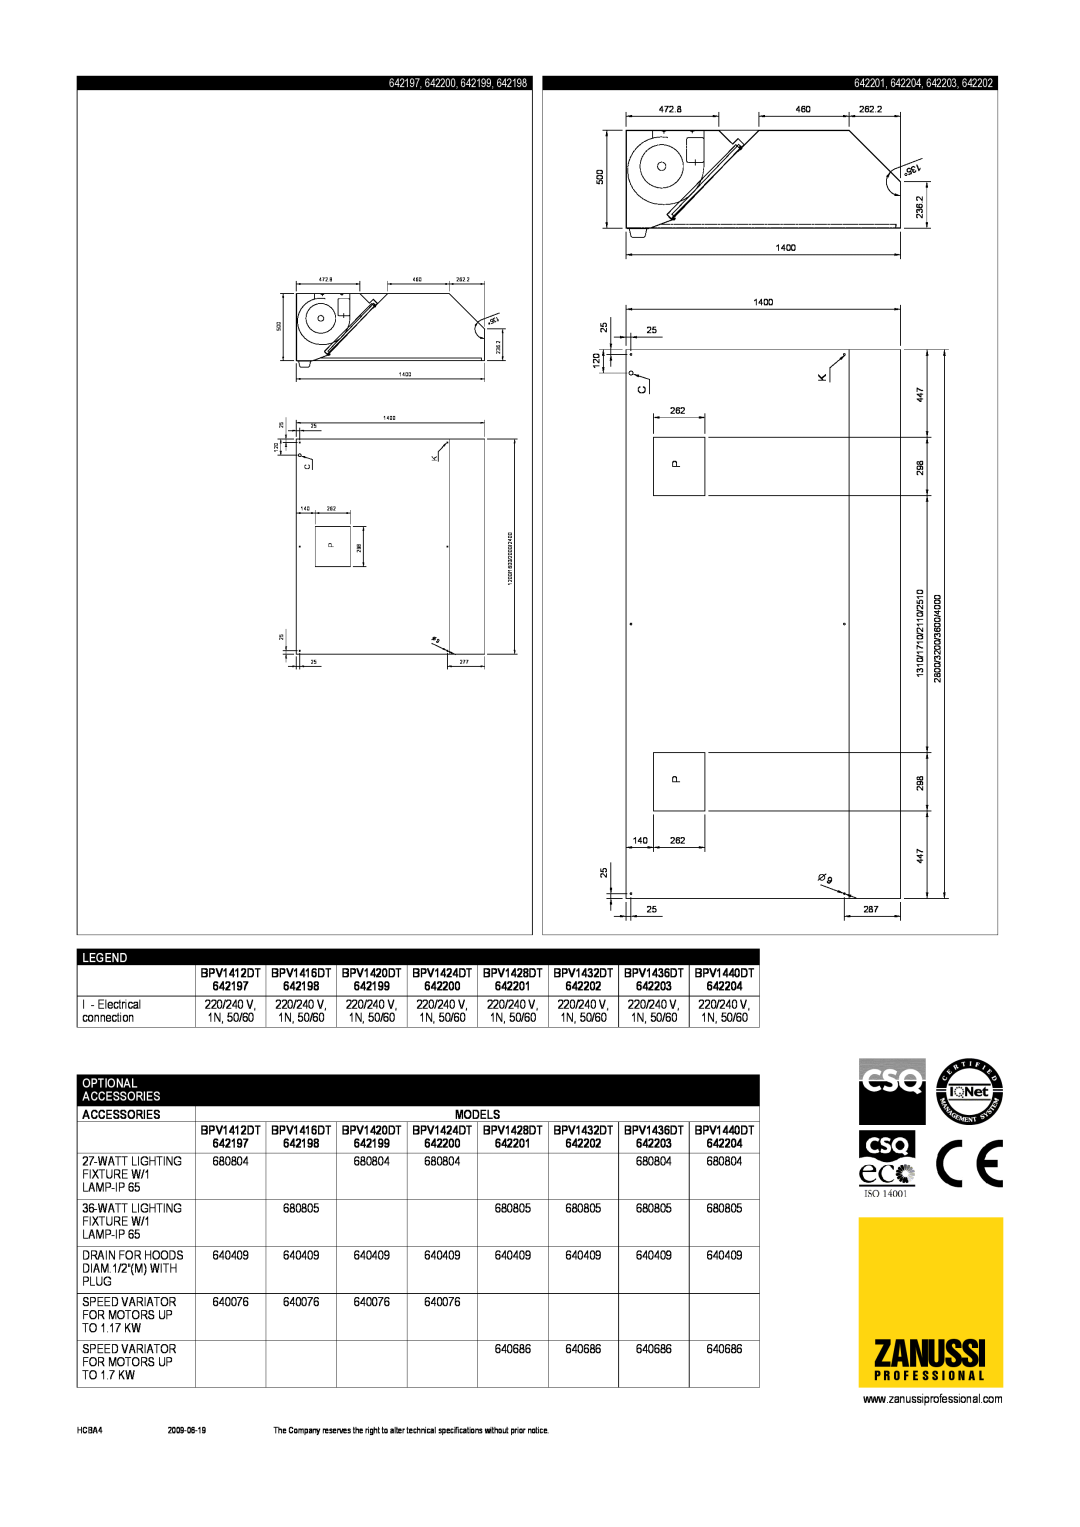 Zanussi 642198, BPV1416DT, BPV1412DT, 642202 Zanussi, I - Electrical, 220/240, connection, Optional, Accessories, Models 